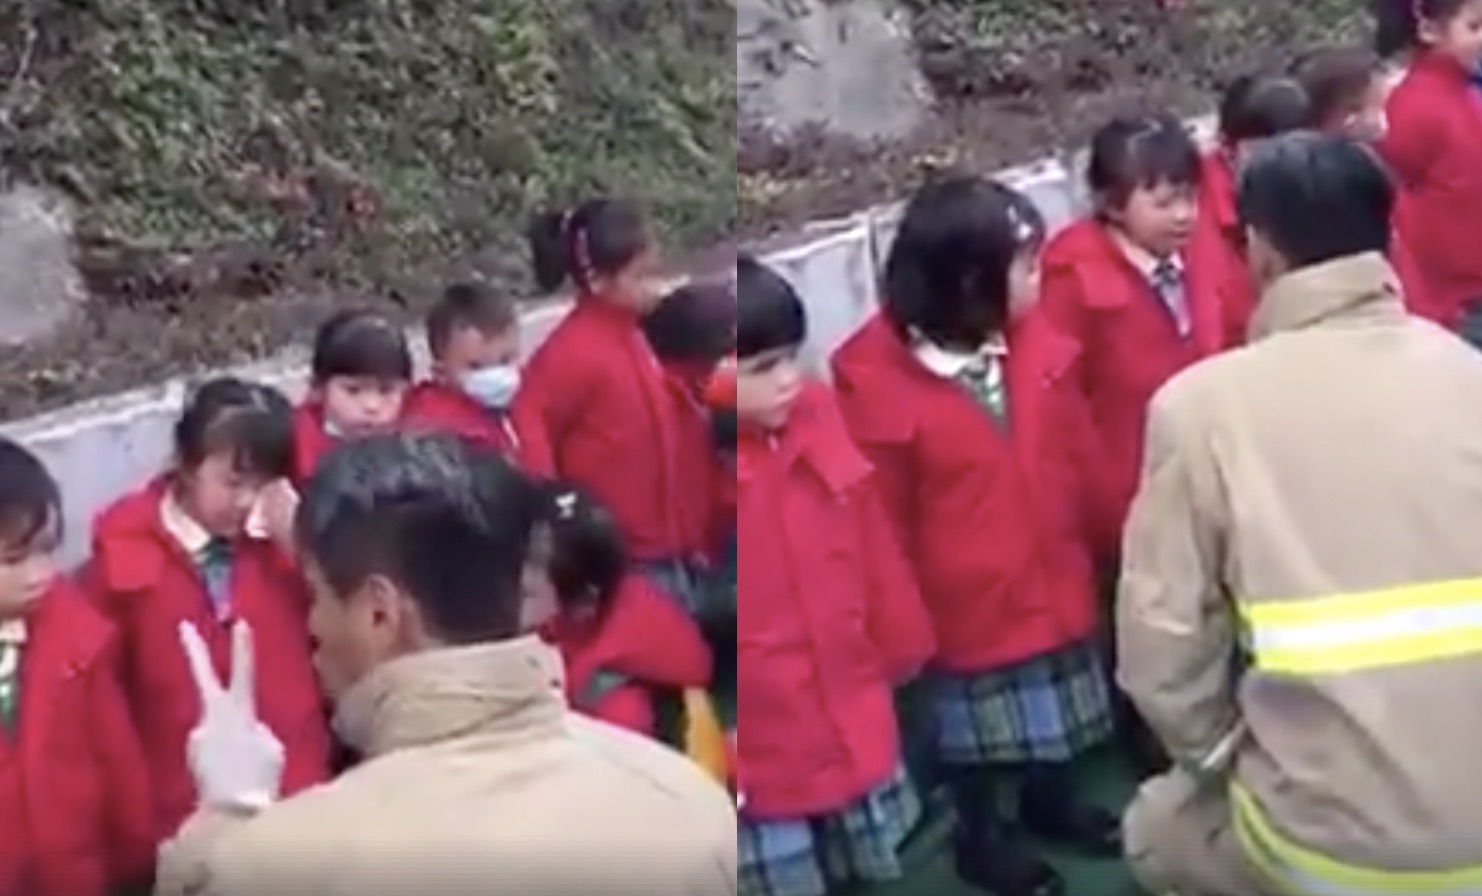 A fireman won the hearts of netizens after he was filmed comforting a group of kindergarten kids who got caught up in a school bus crash last week. Screengrab via Facebook/Esther Chan.